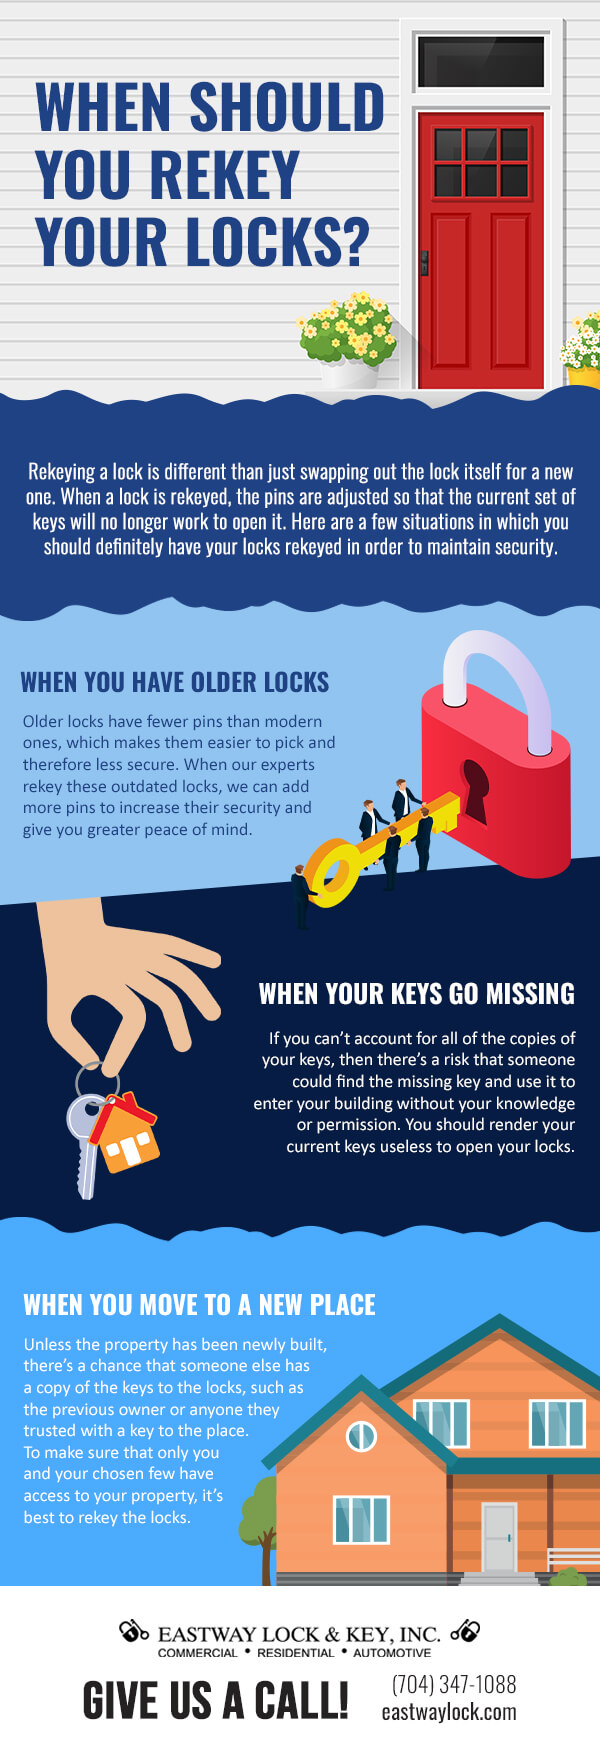 When Should You Rekey Your Locks? 